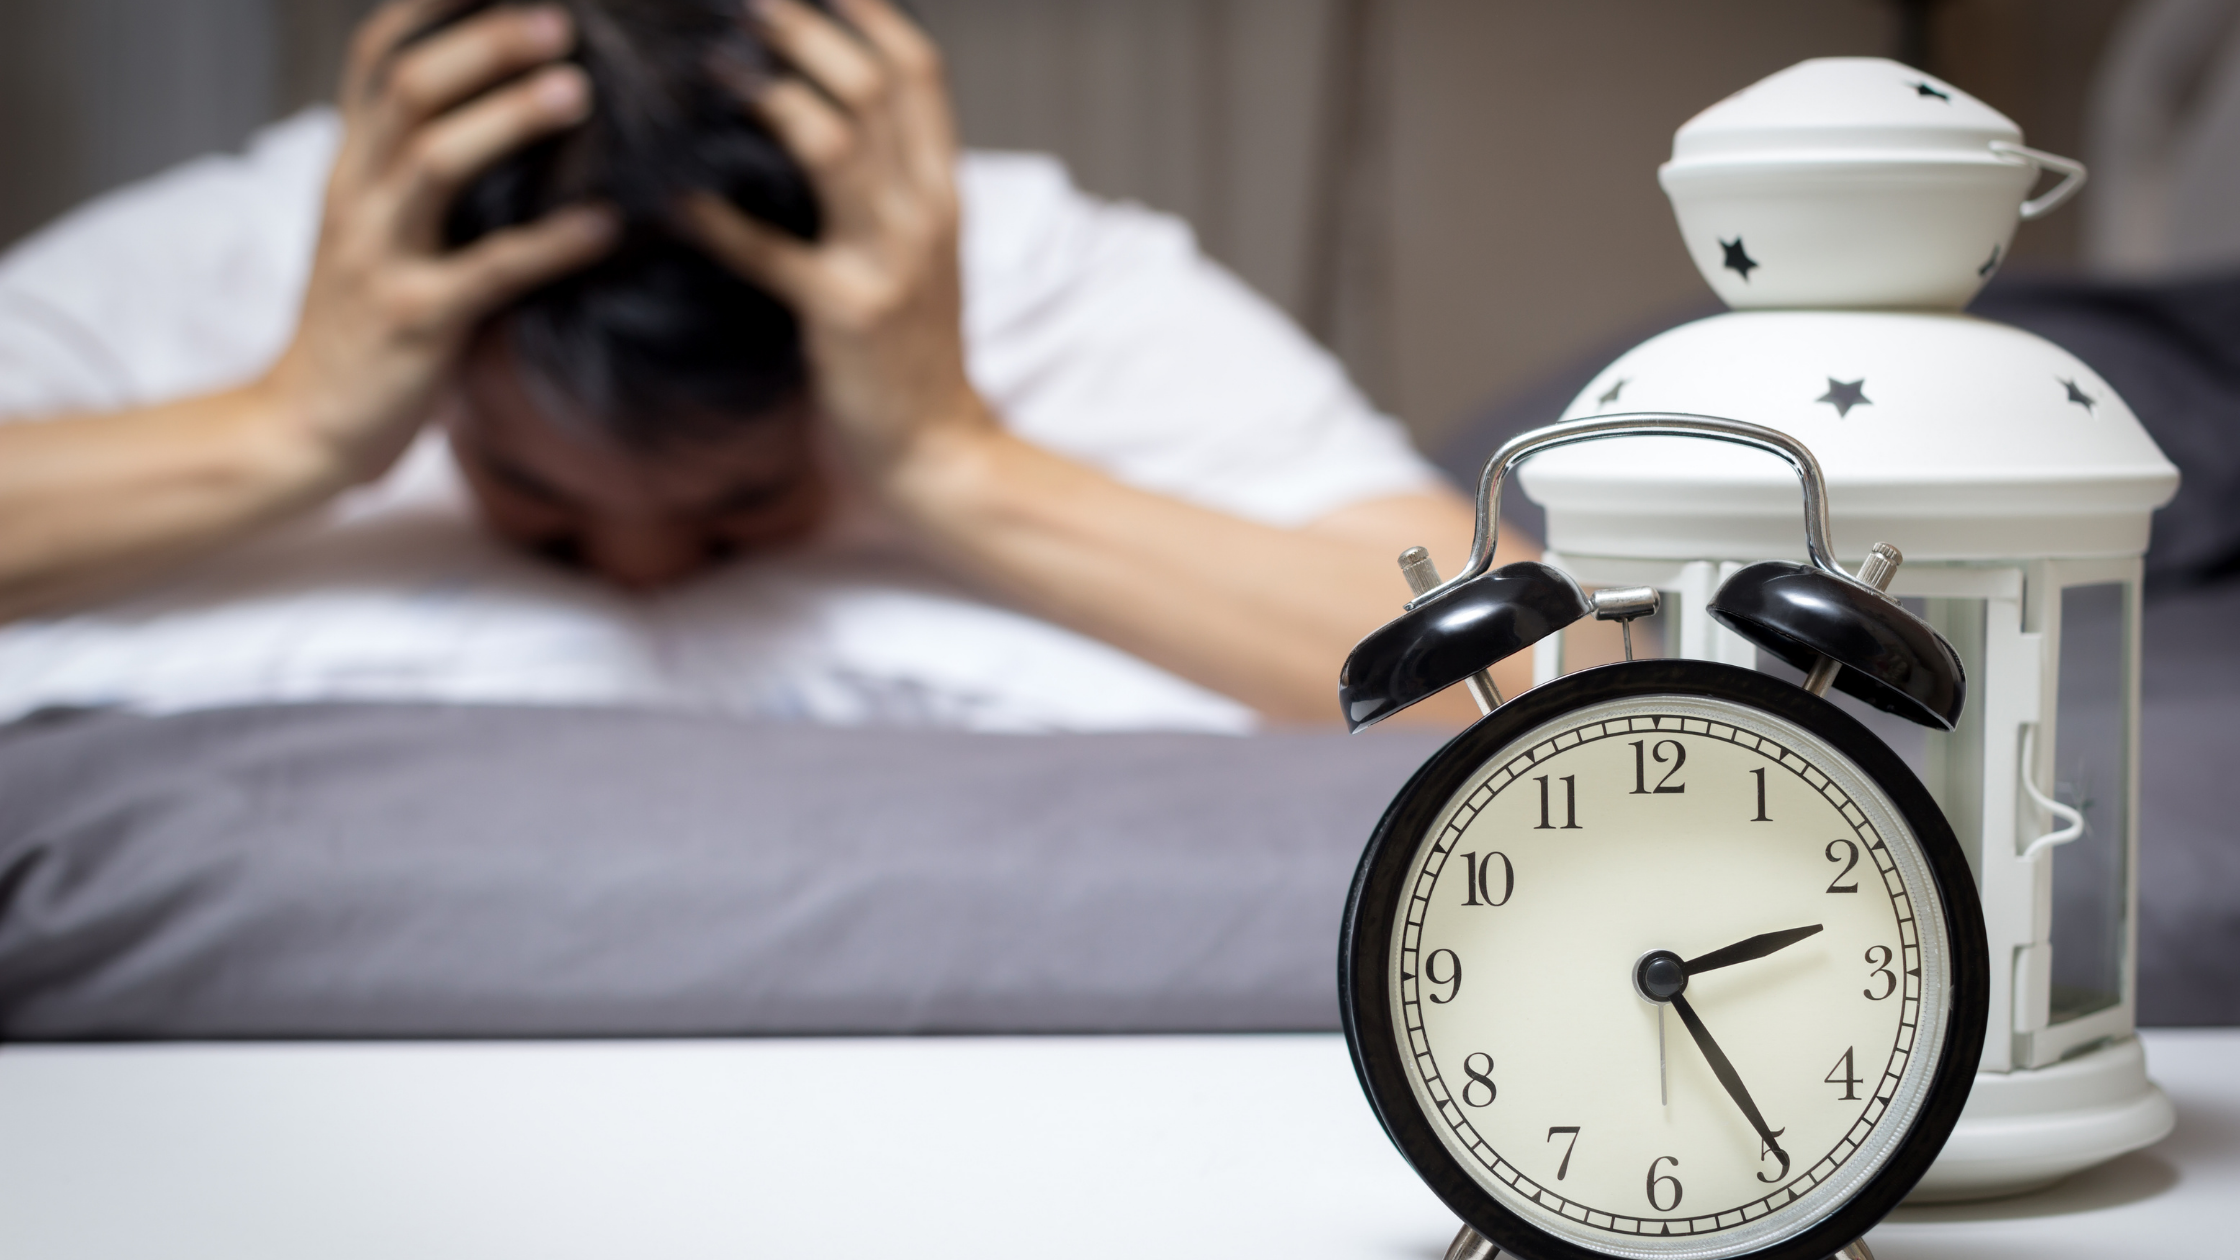 Can't Sleep? This May Help Your Insomnia